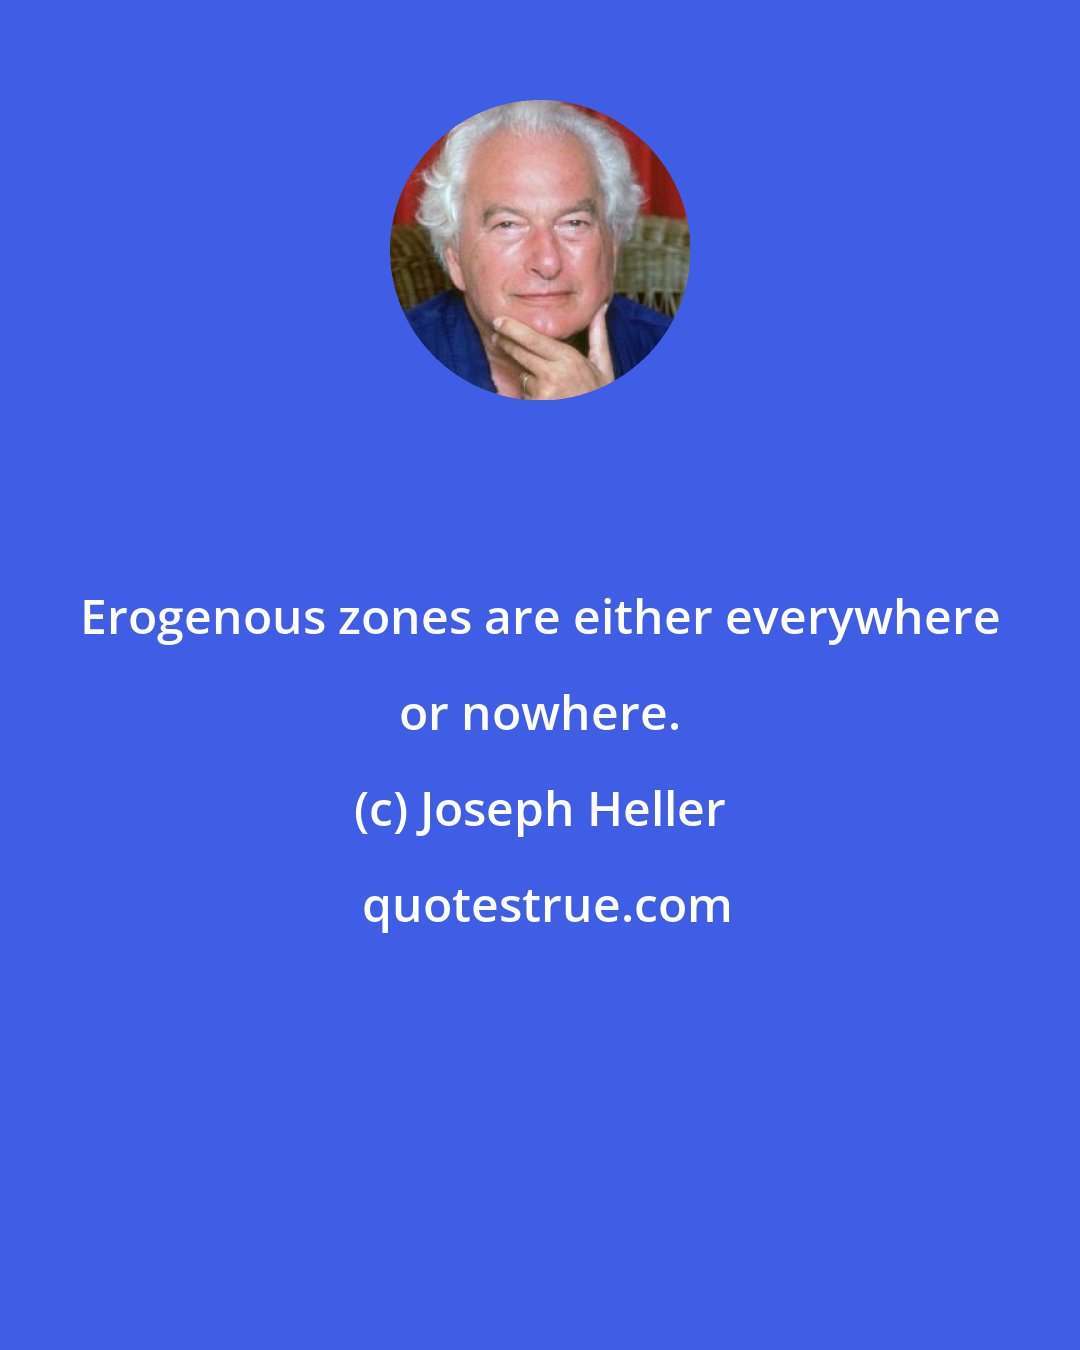 Joseph Heller: Erogenous zones are either everywhere or nowhere.